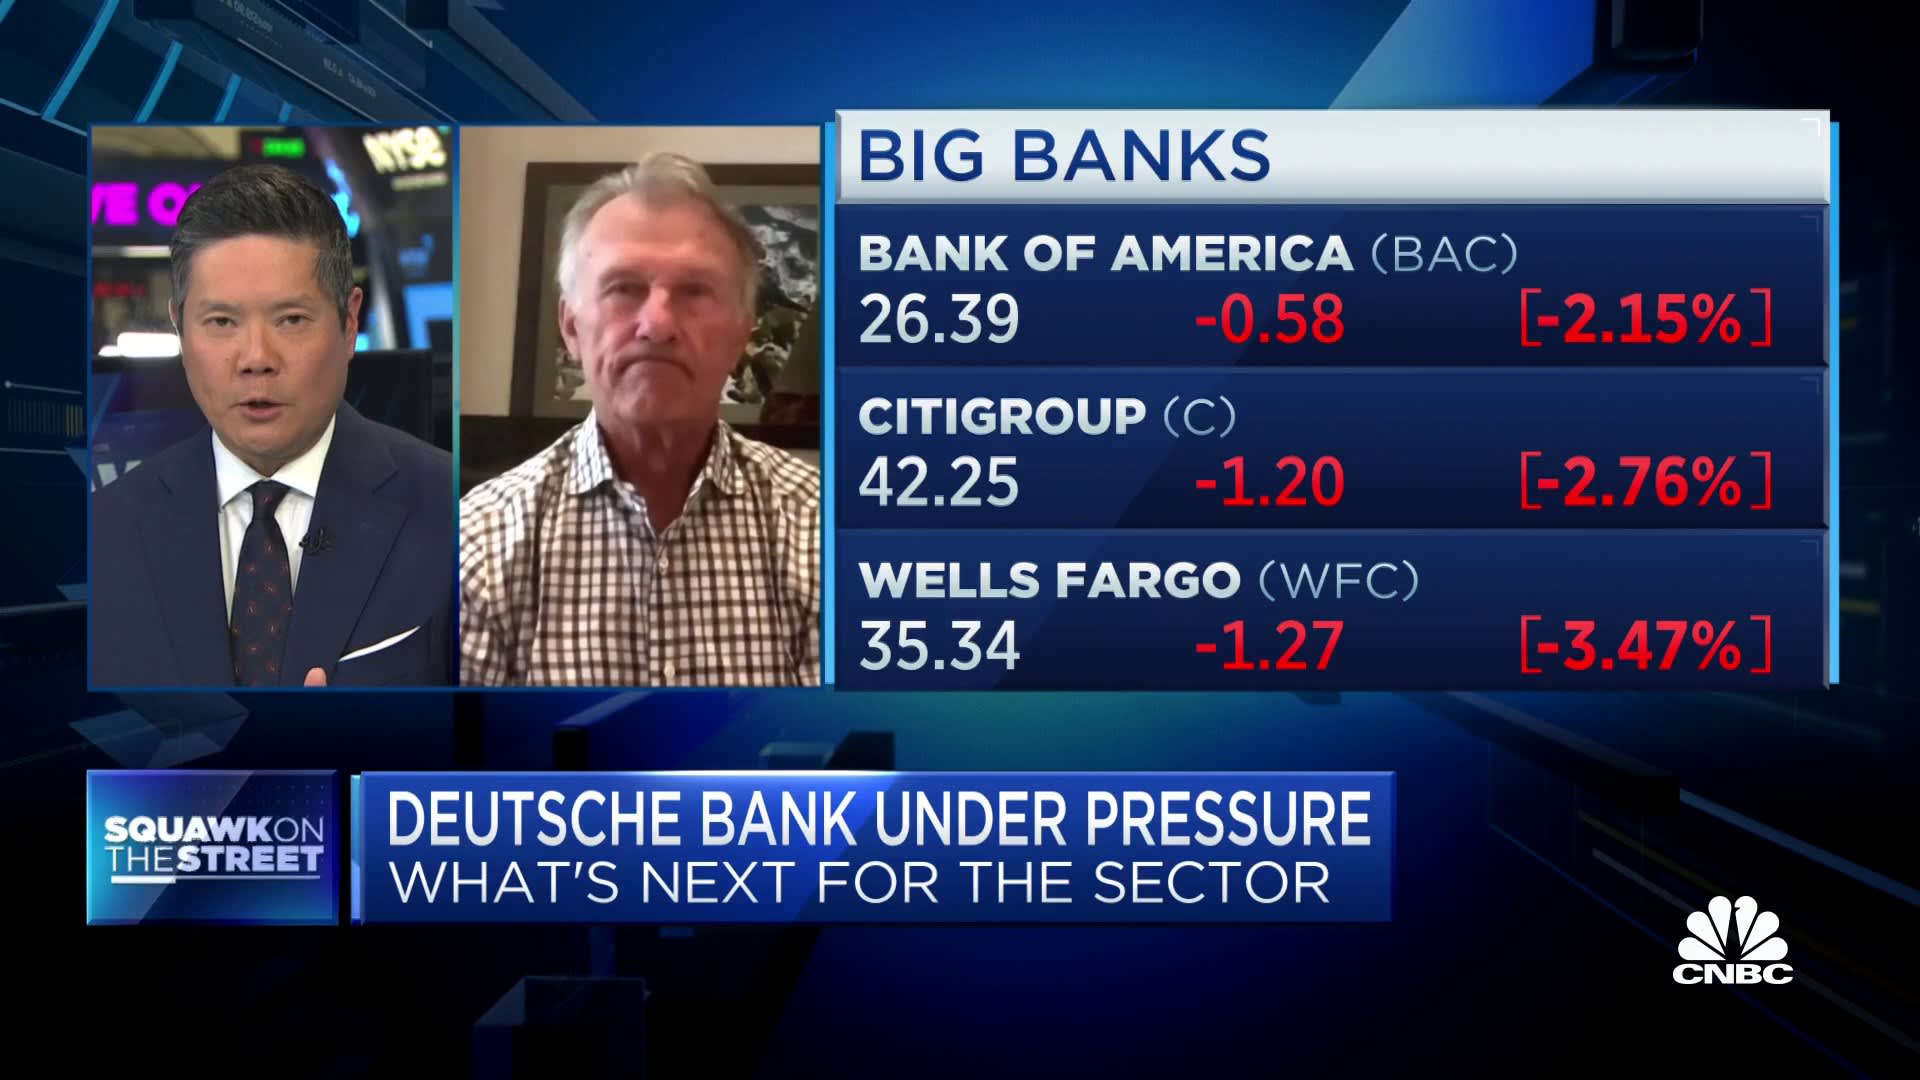 It’s important to understand what an outlier SVB was, says fmr. WF CEO Dick Kovacevich